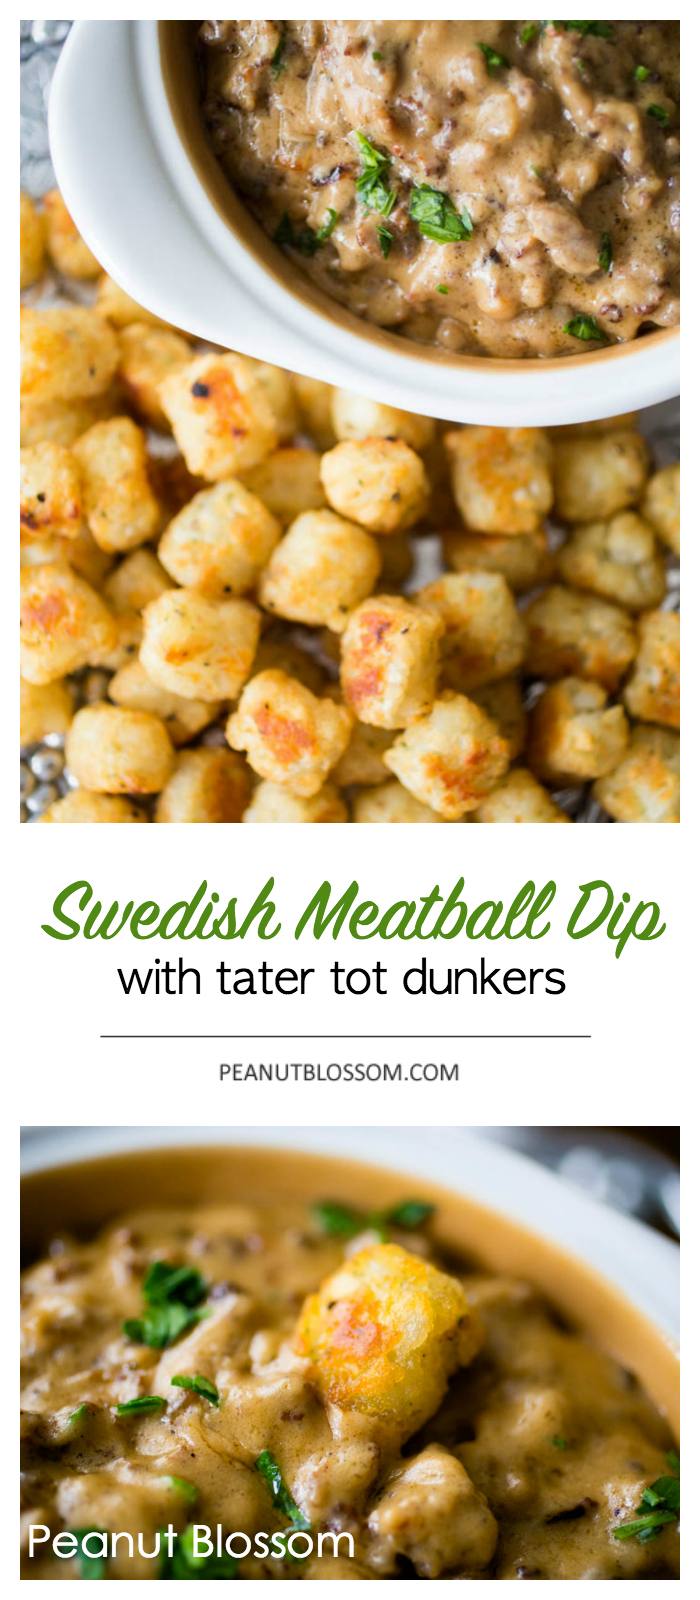 Swedish meatball dip with tater tot dunkers